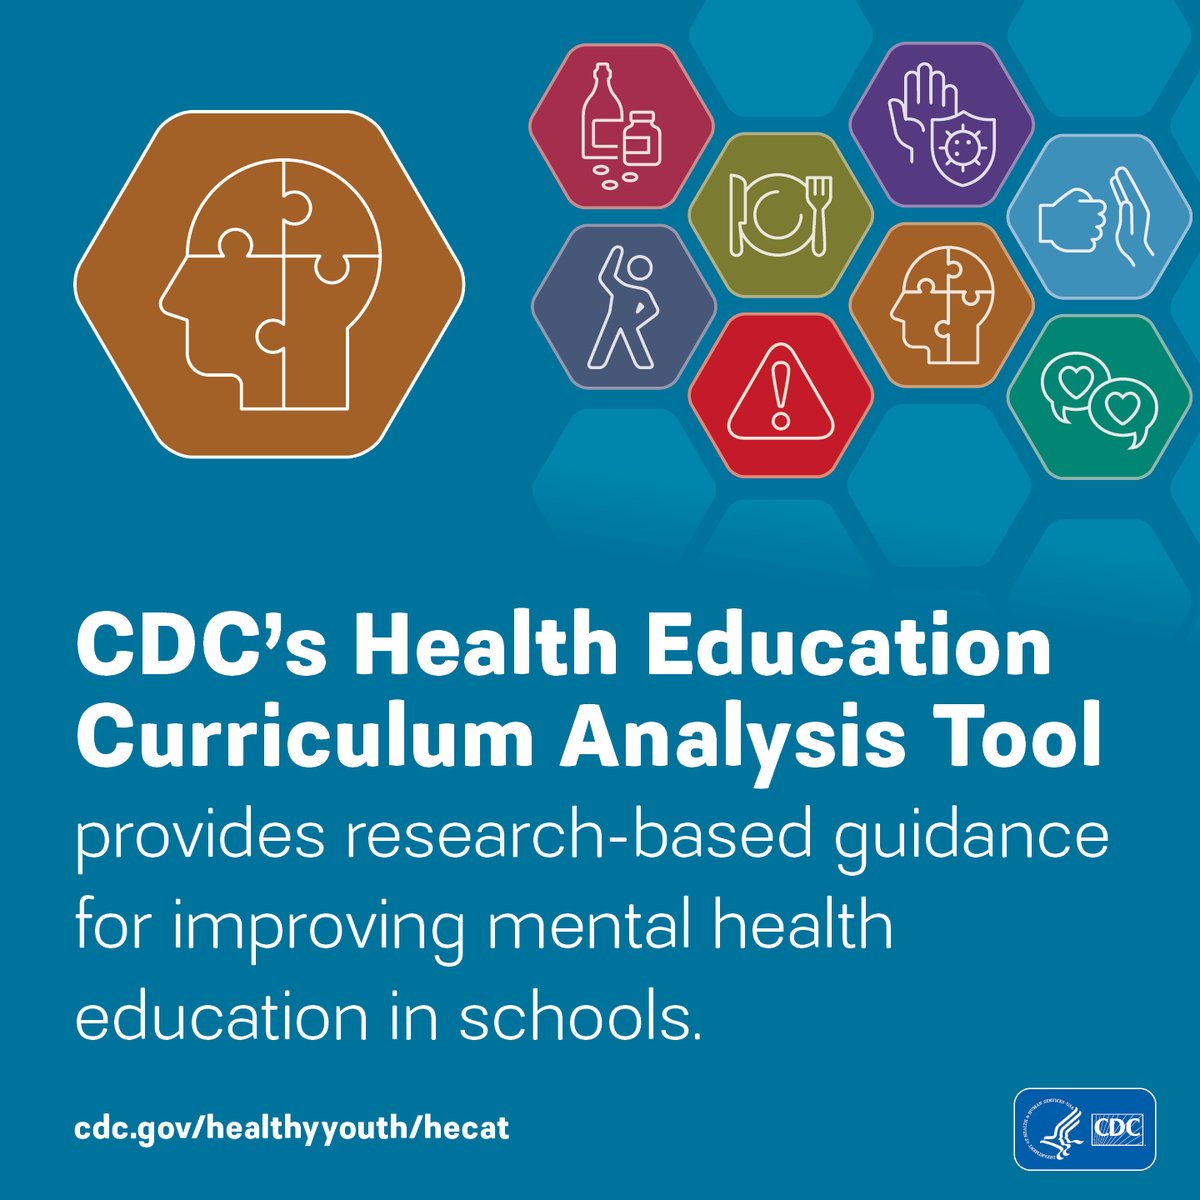 Schools play a critical role in promoting the mental health of students through health education. CDC’s Health Education Curriculum Analysis Tool provides research-based guidance for improving mental health education in schools. #AEW2023 bit.ly/3CCiNK0